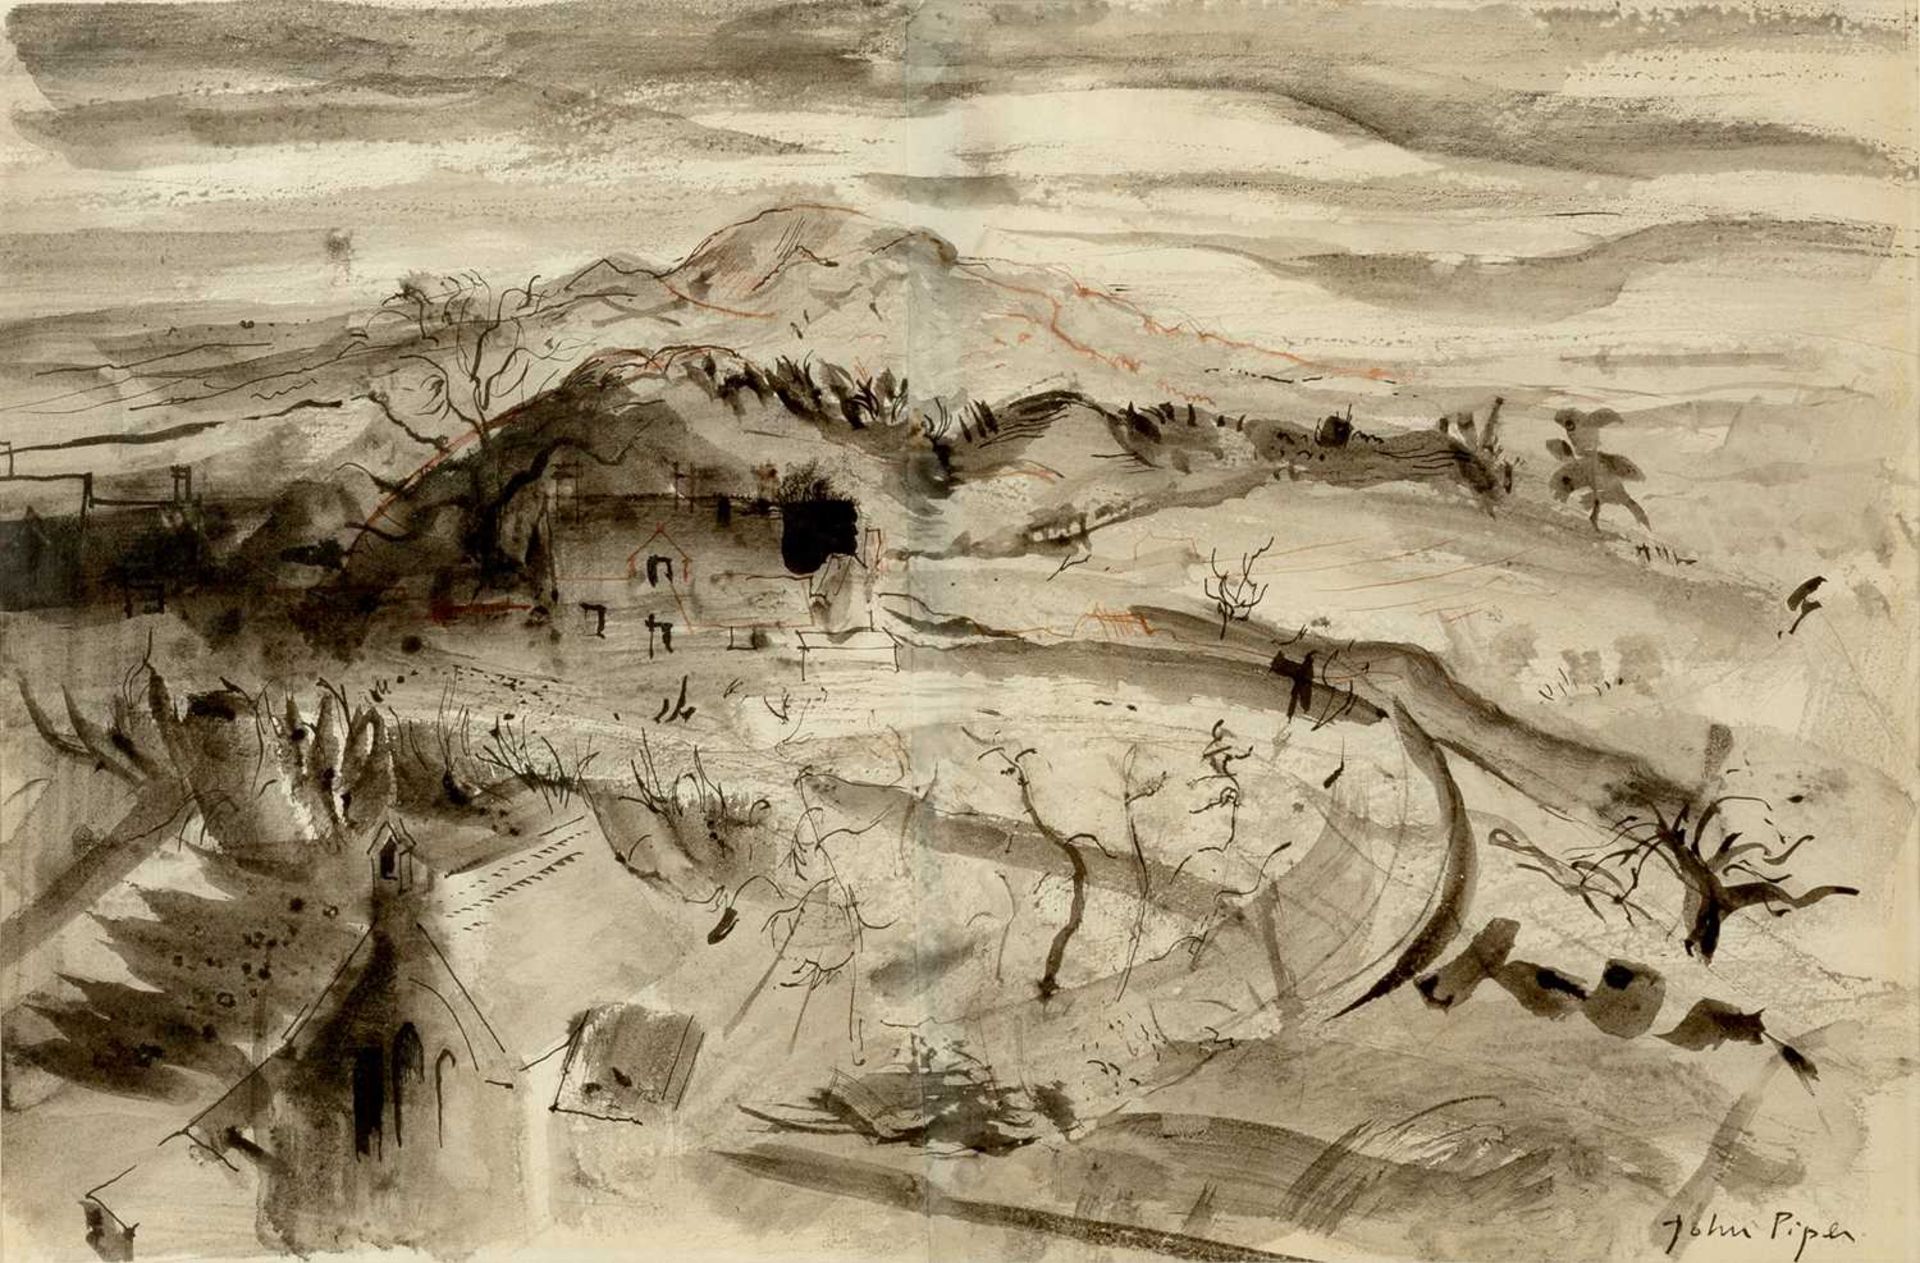 John Piper (1903-1992) Powerstock, Dorset signed (lower right) pen, ink, and wash on paper 27.5 x